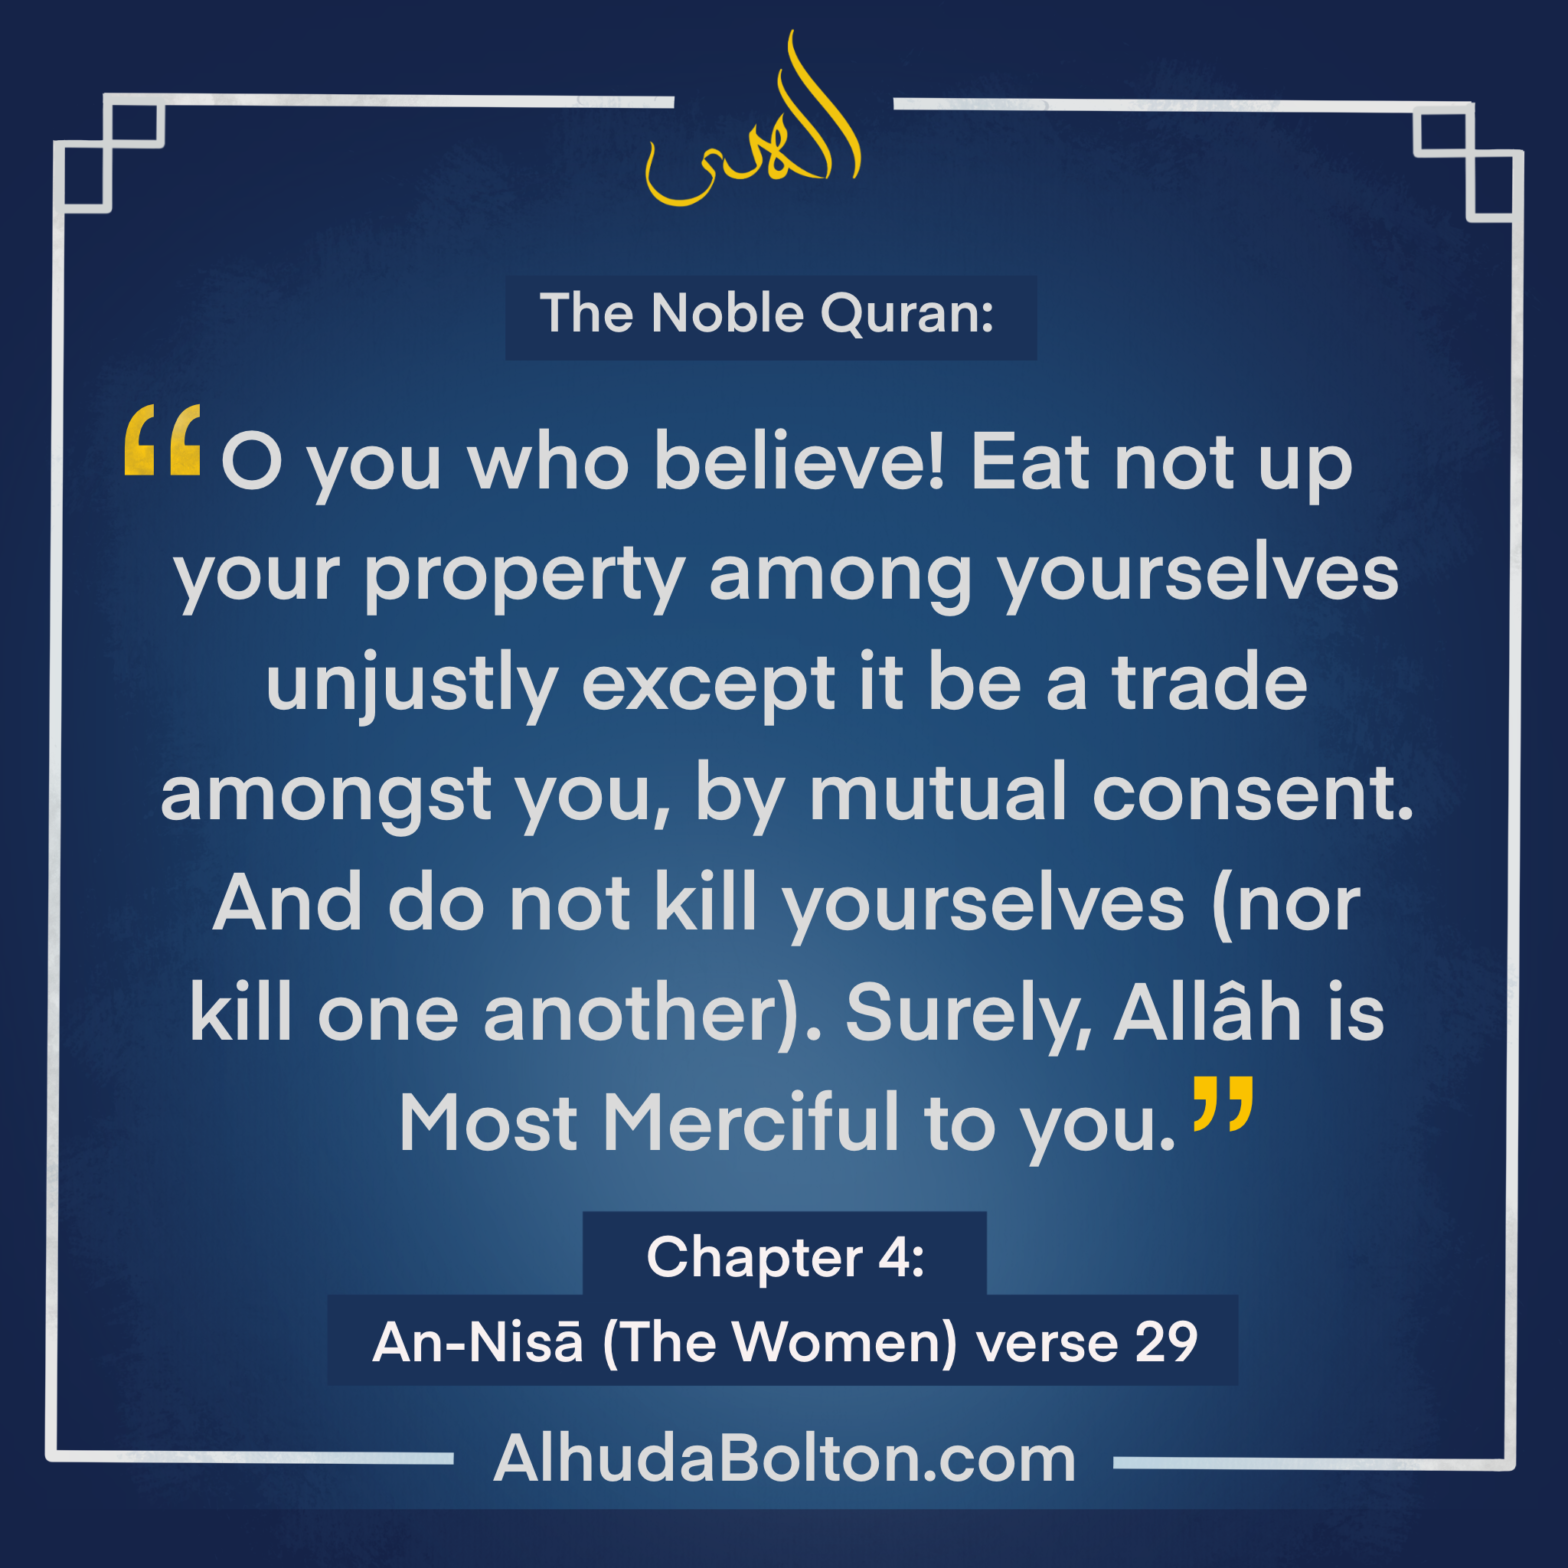 Quran: “..and do not kill yourselves”